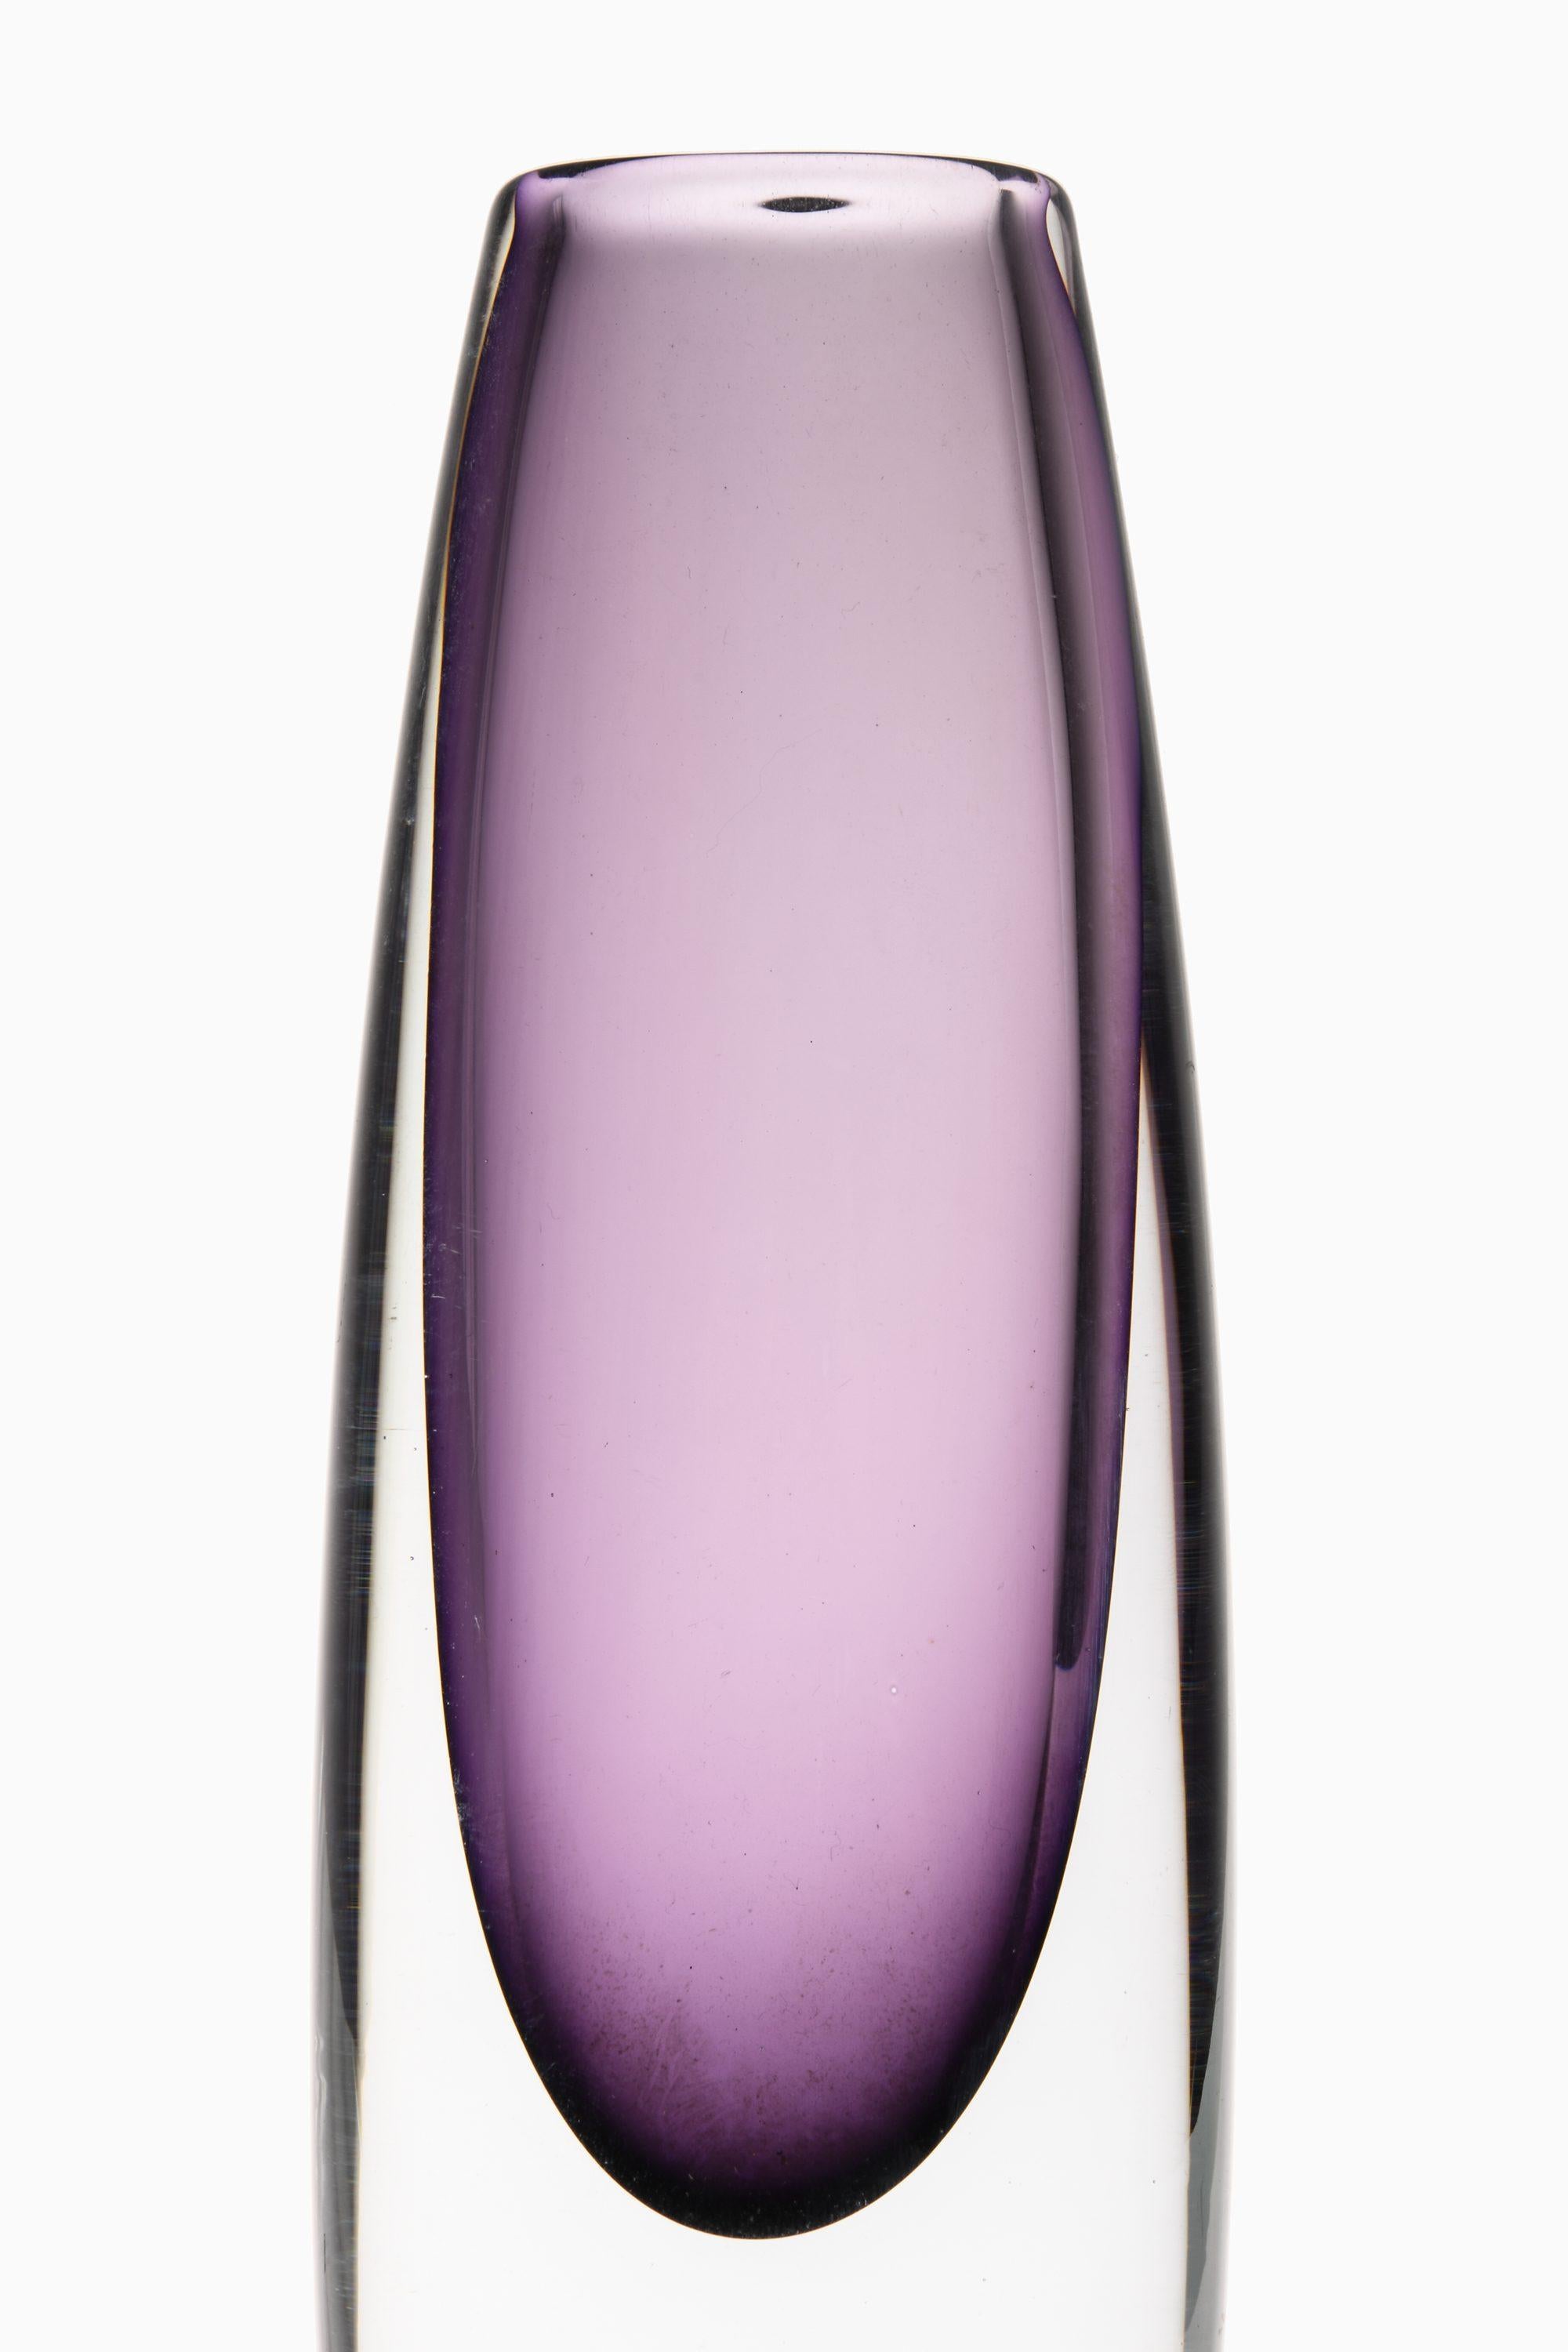 Glass Vase in Purple by Gunnar Nylund, 1950's

Additional Information:
Material: Glass
Style: Mid century, Scandinavian
Produced by Strömbergshyttan in Sweden
Dimensions (W x D x H): 8 x 5 x 26 cm
Condition: Good vintage condition, with small signs